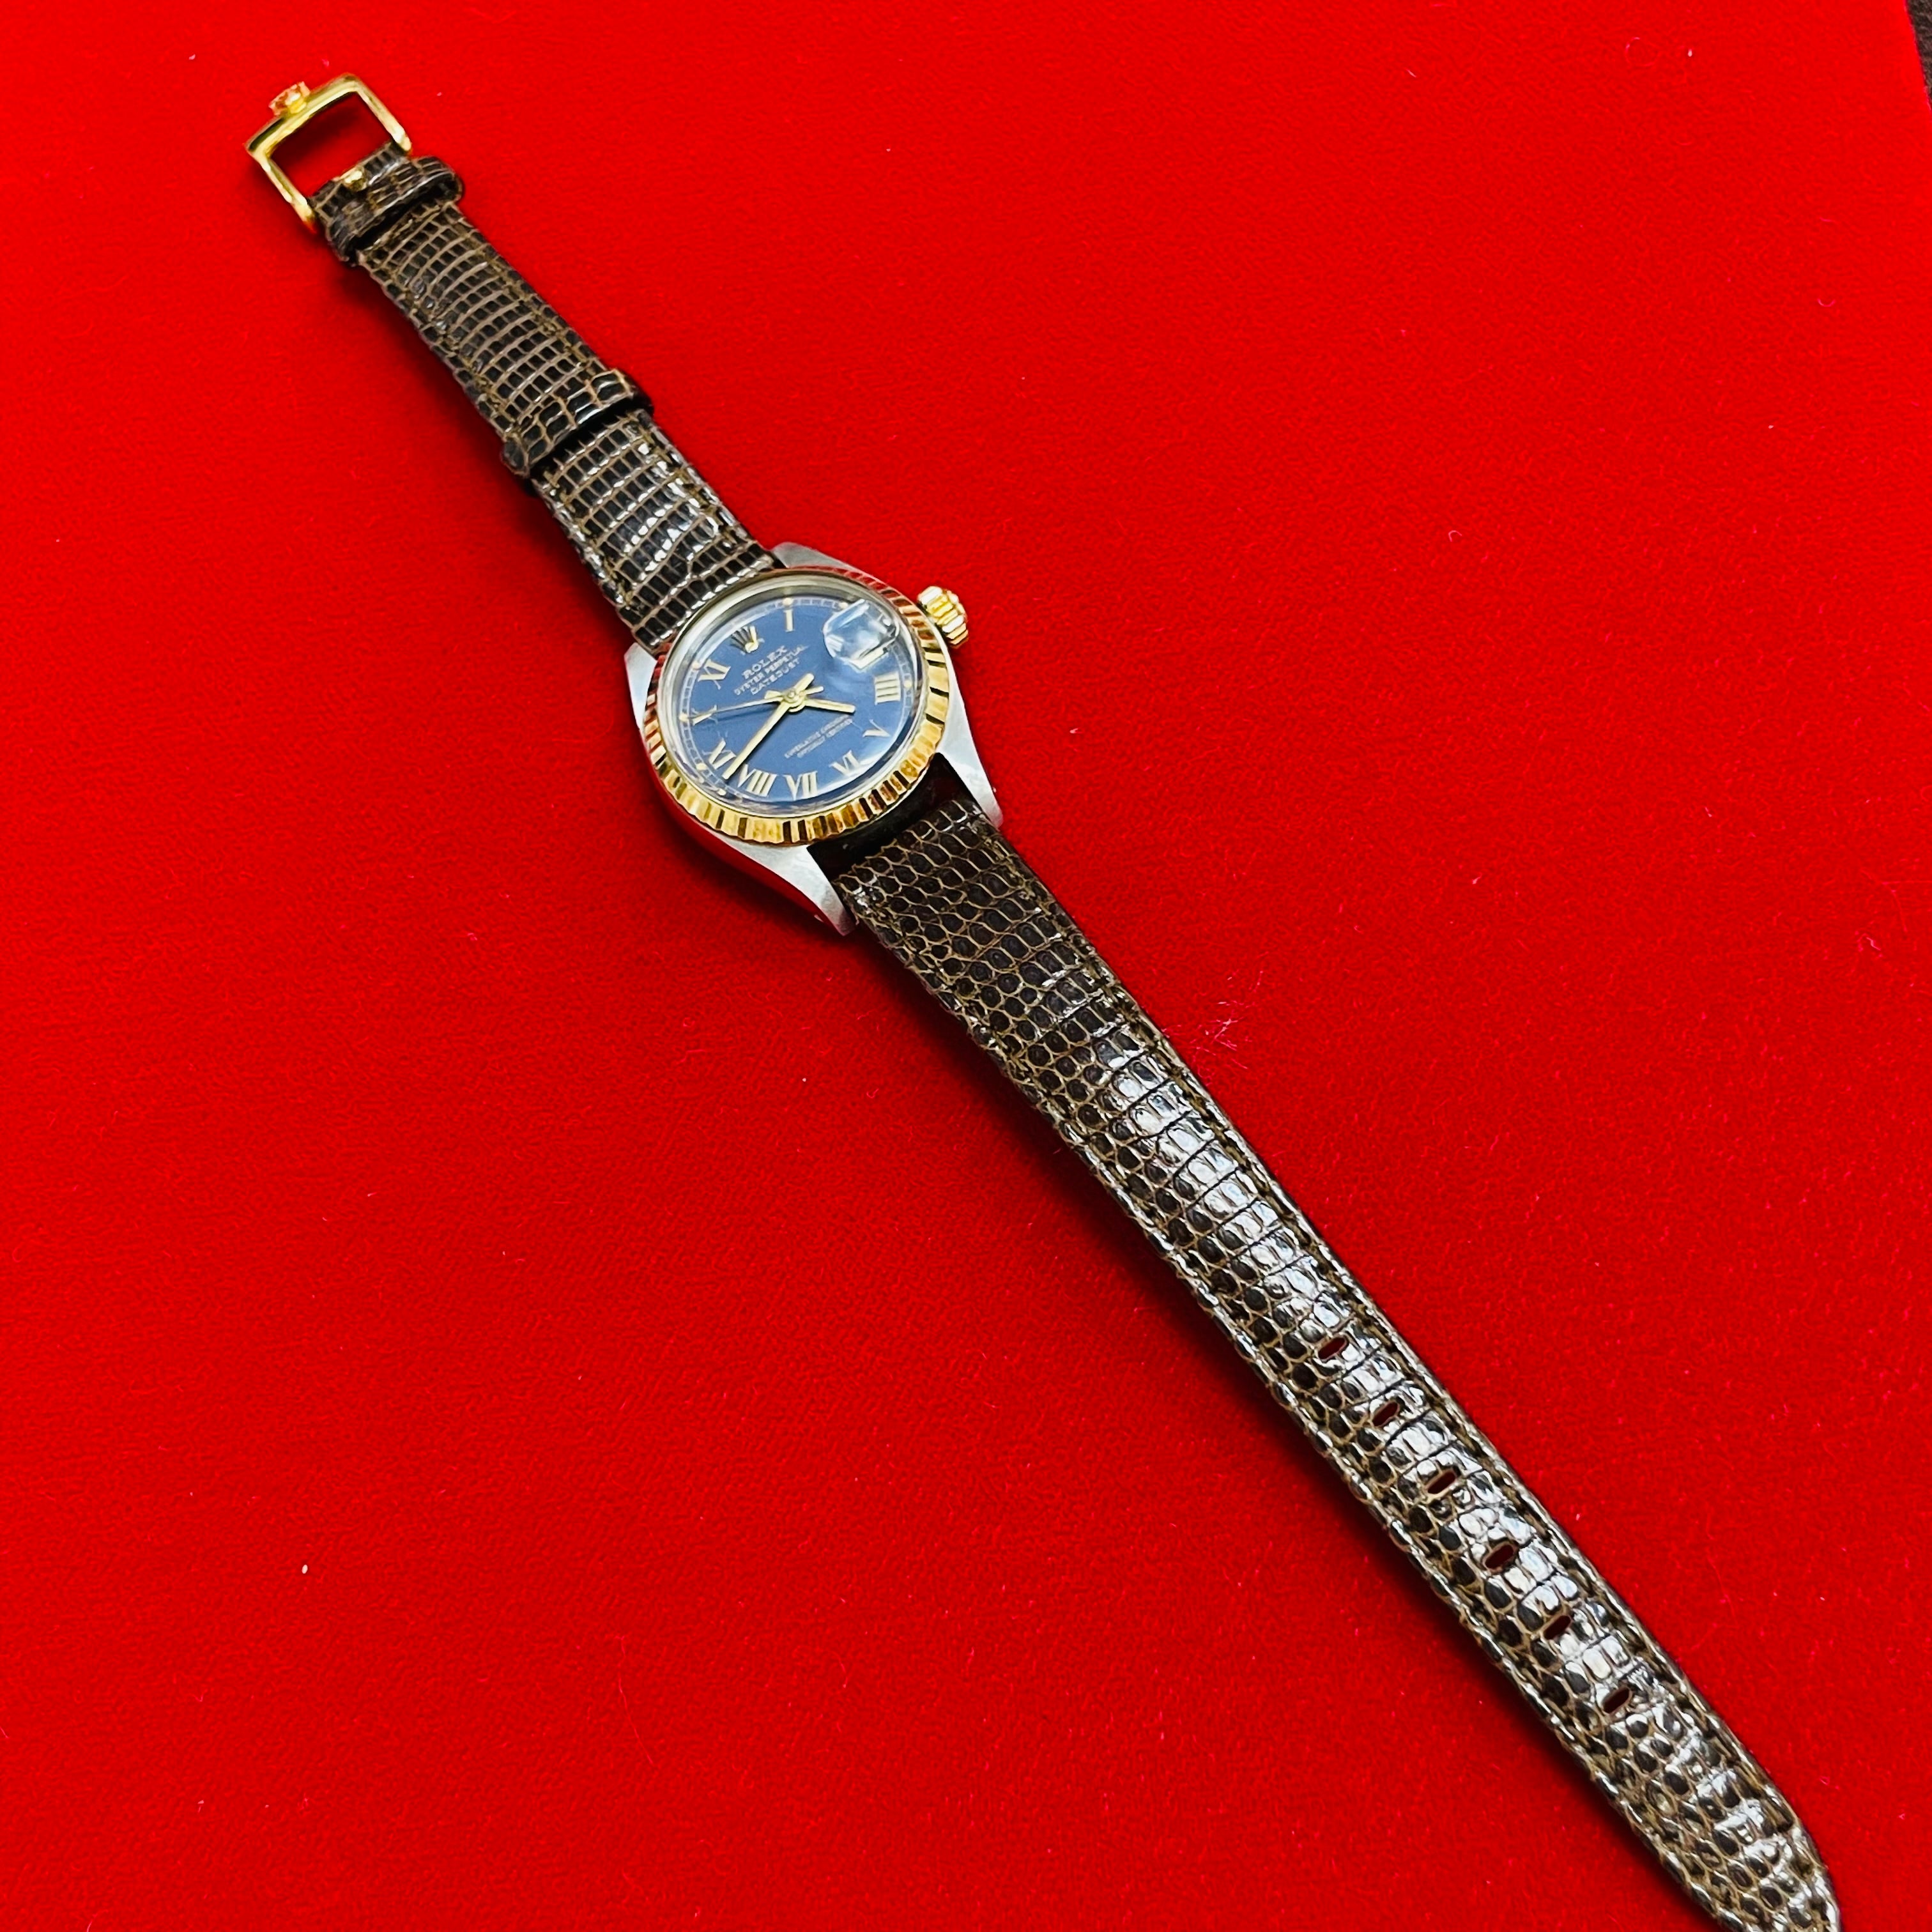 26mm Two Tone 18K Gold and Steel Rare Buckley Blue Dial Wristwatch with Leather Strap